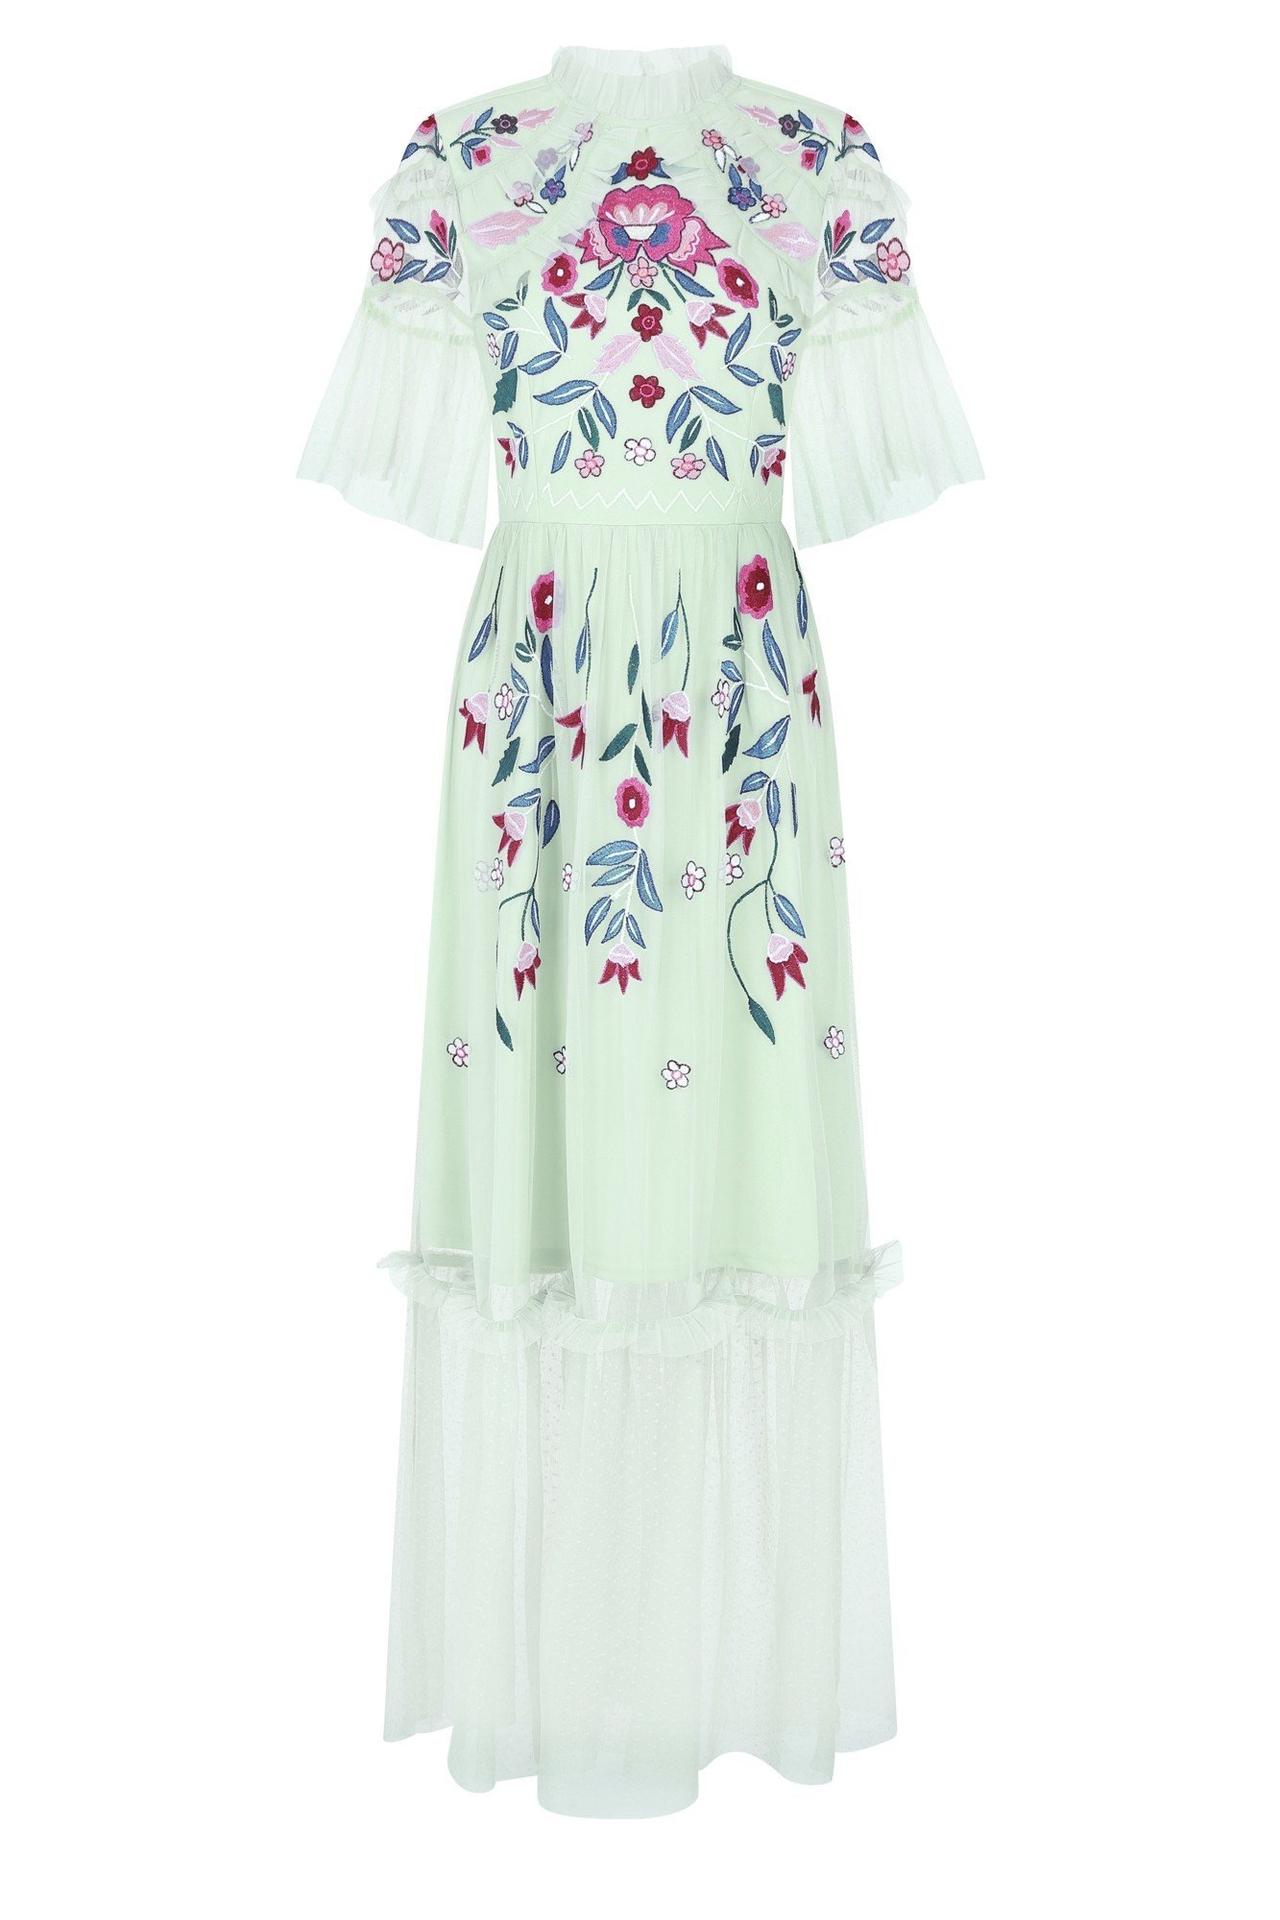 Frock and Frill Embroidered Maxi Dress With Tie Waist in White